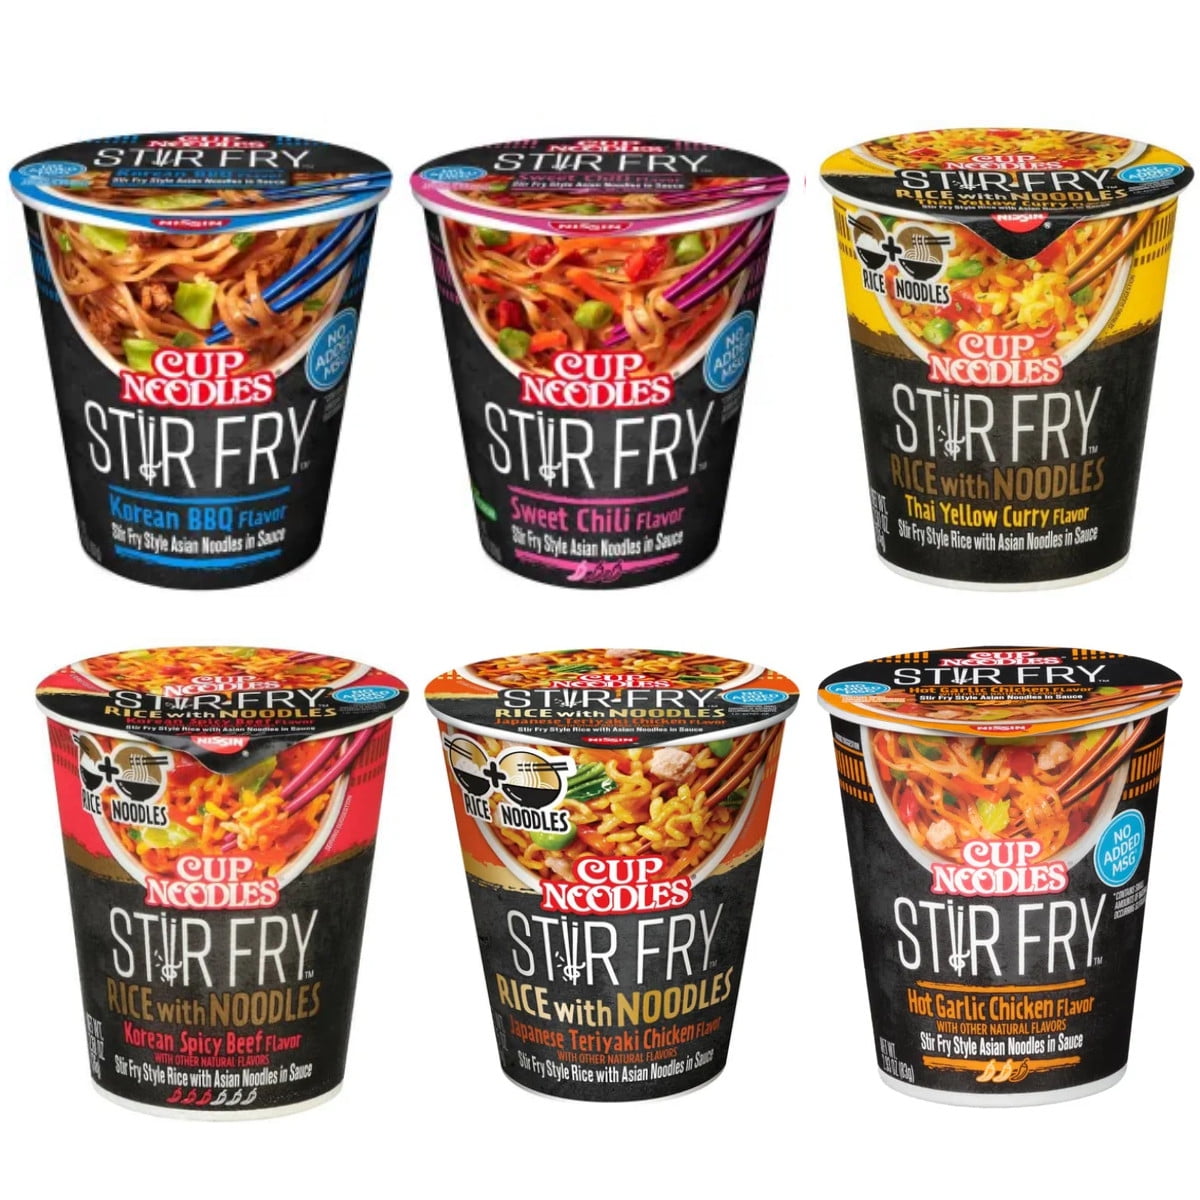 Nissin Cup Noodles Stir Fry Rice with Noodles, Variety Flavors, 2.75 oz ...